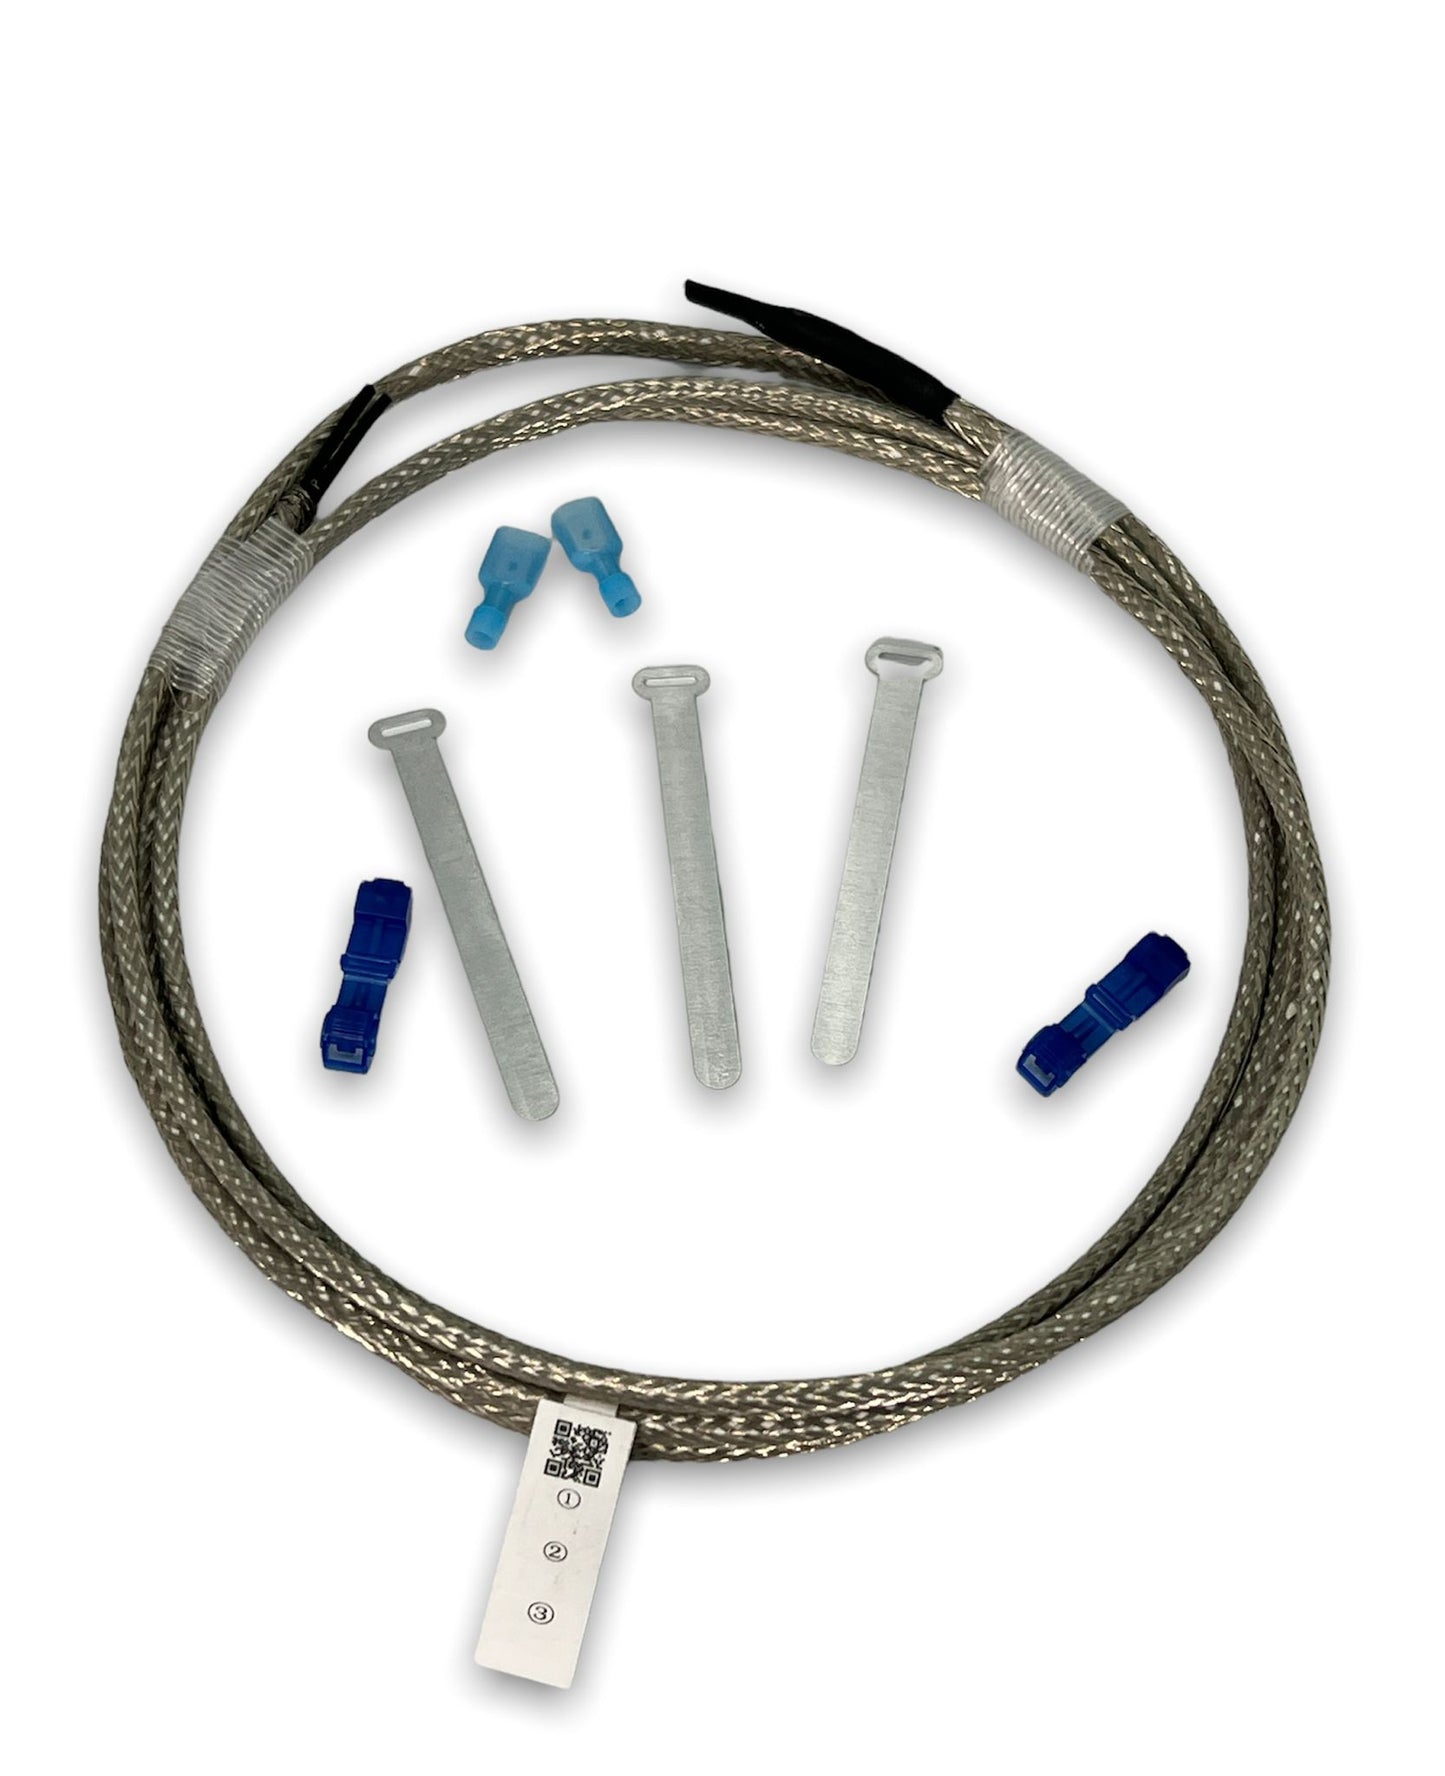 Drain Tube Heating Wire Kit for Samsung Refrigerators - ER20-00031A - Water leak and Drain issues repair kit INVERTEC